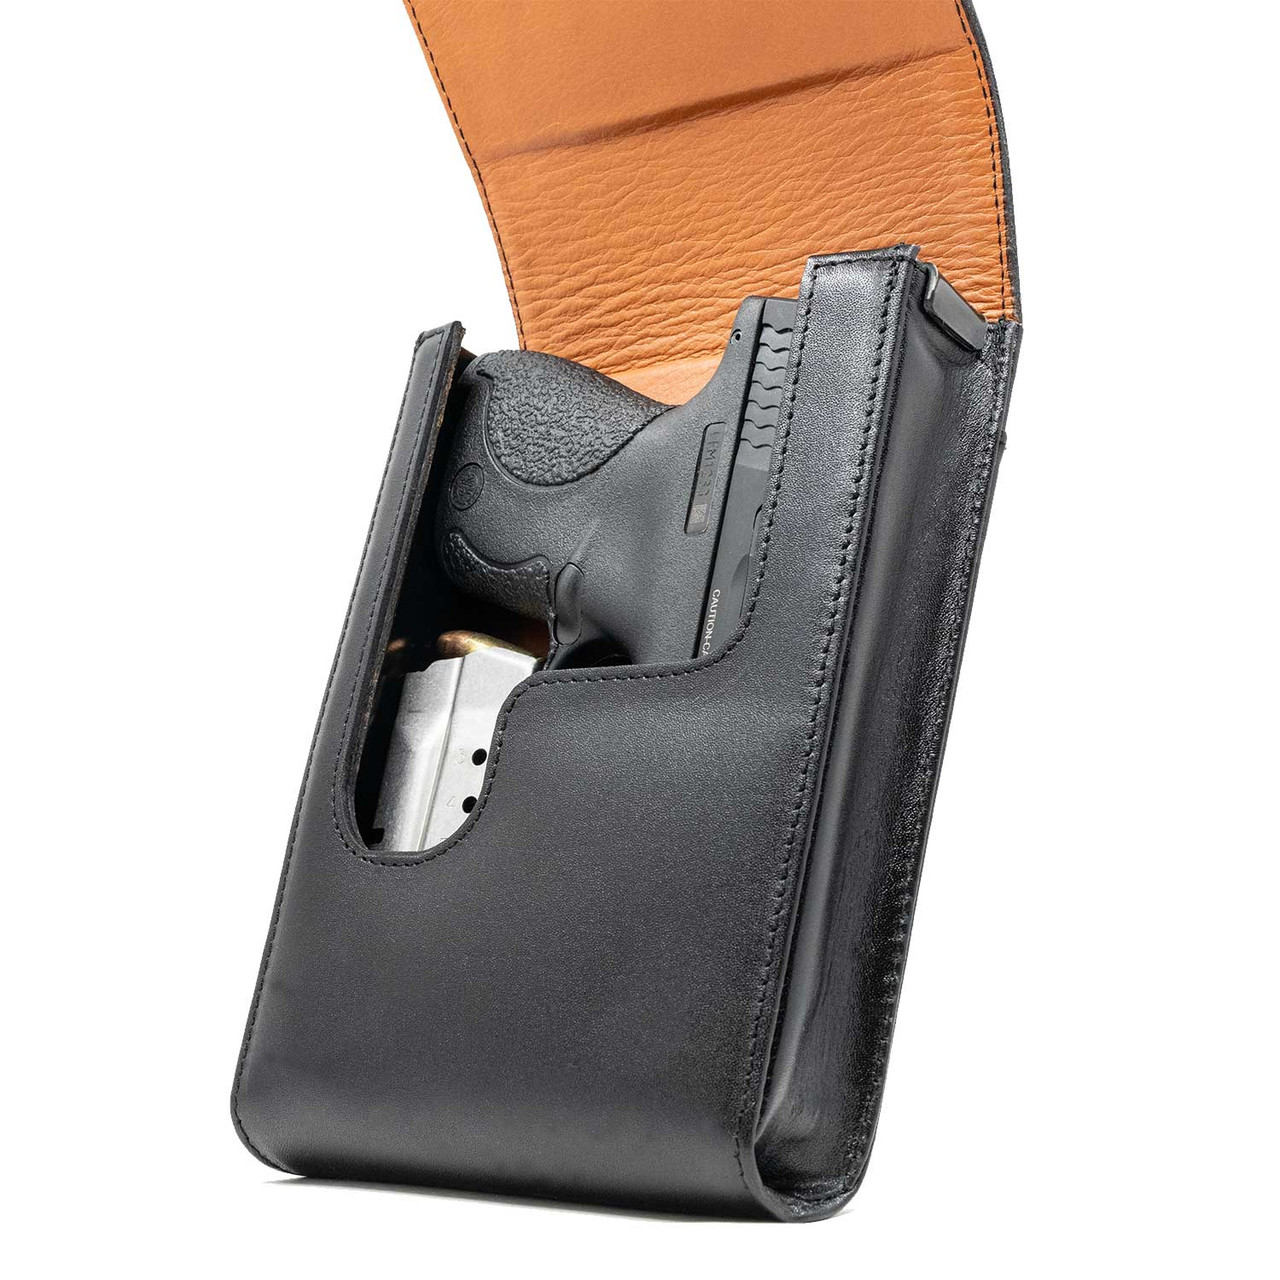 The Kahr K40 Xtra Mag Black Leather Holster